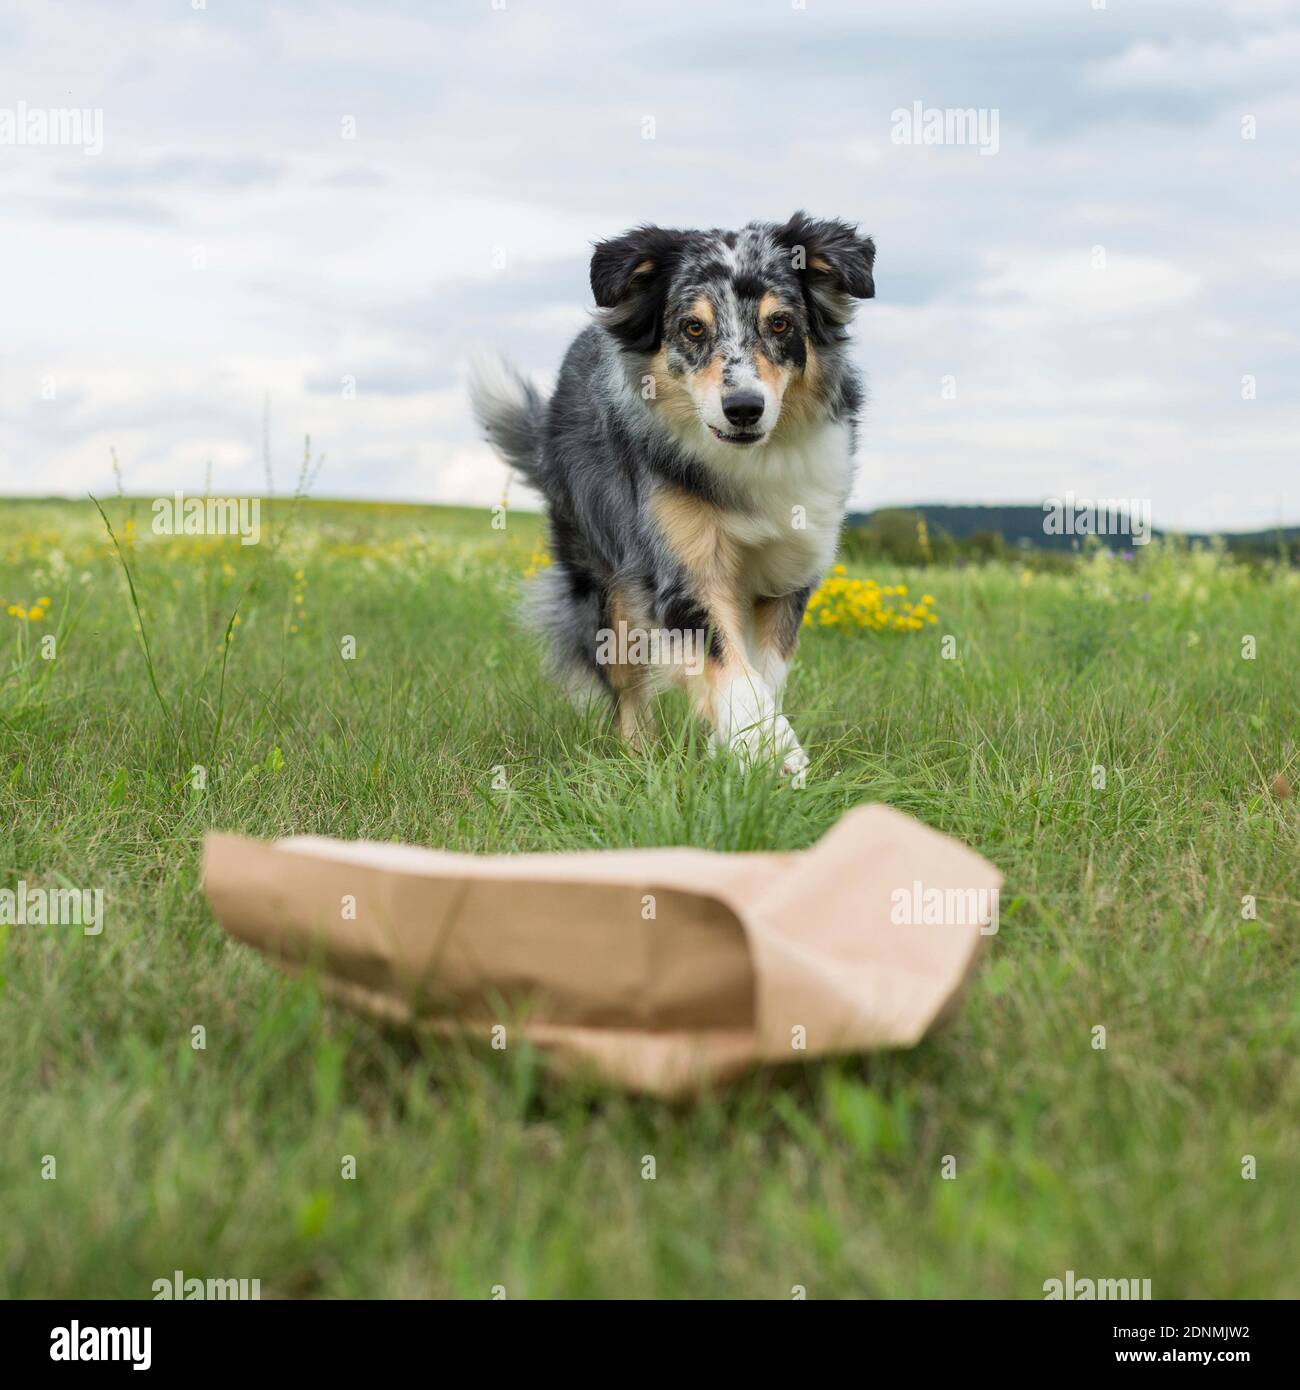 Australian Shepherd. An adult dog runs towards a paper bag that may contain rubbish. Germany Stock Photo